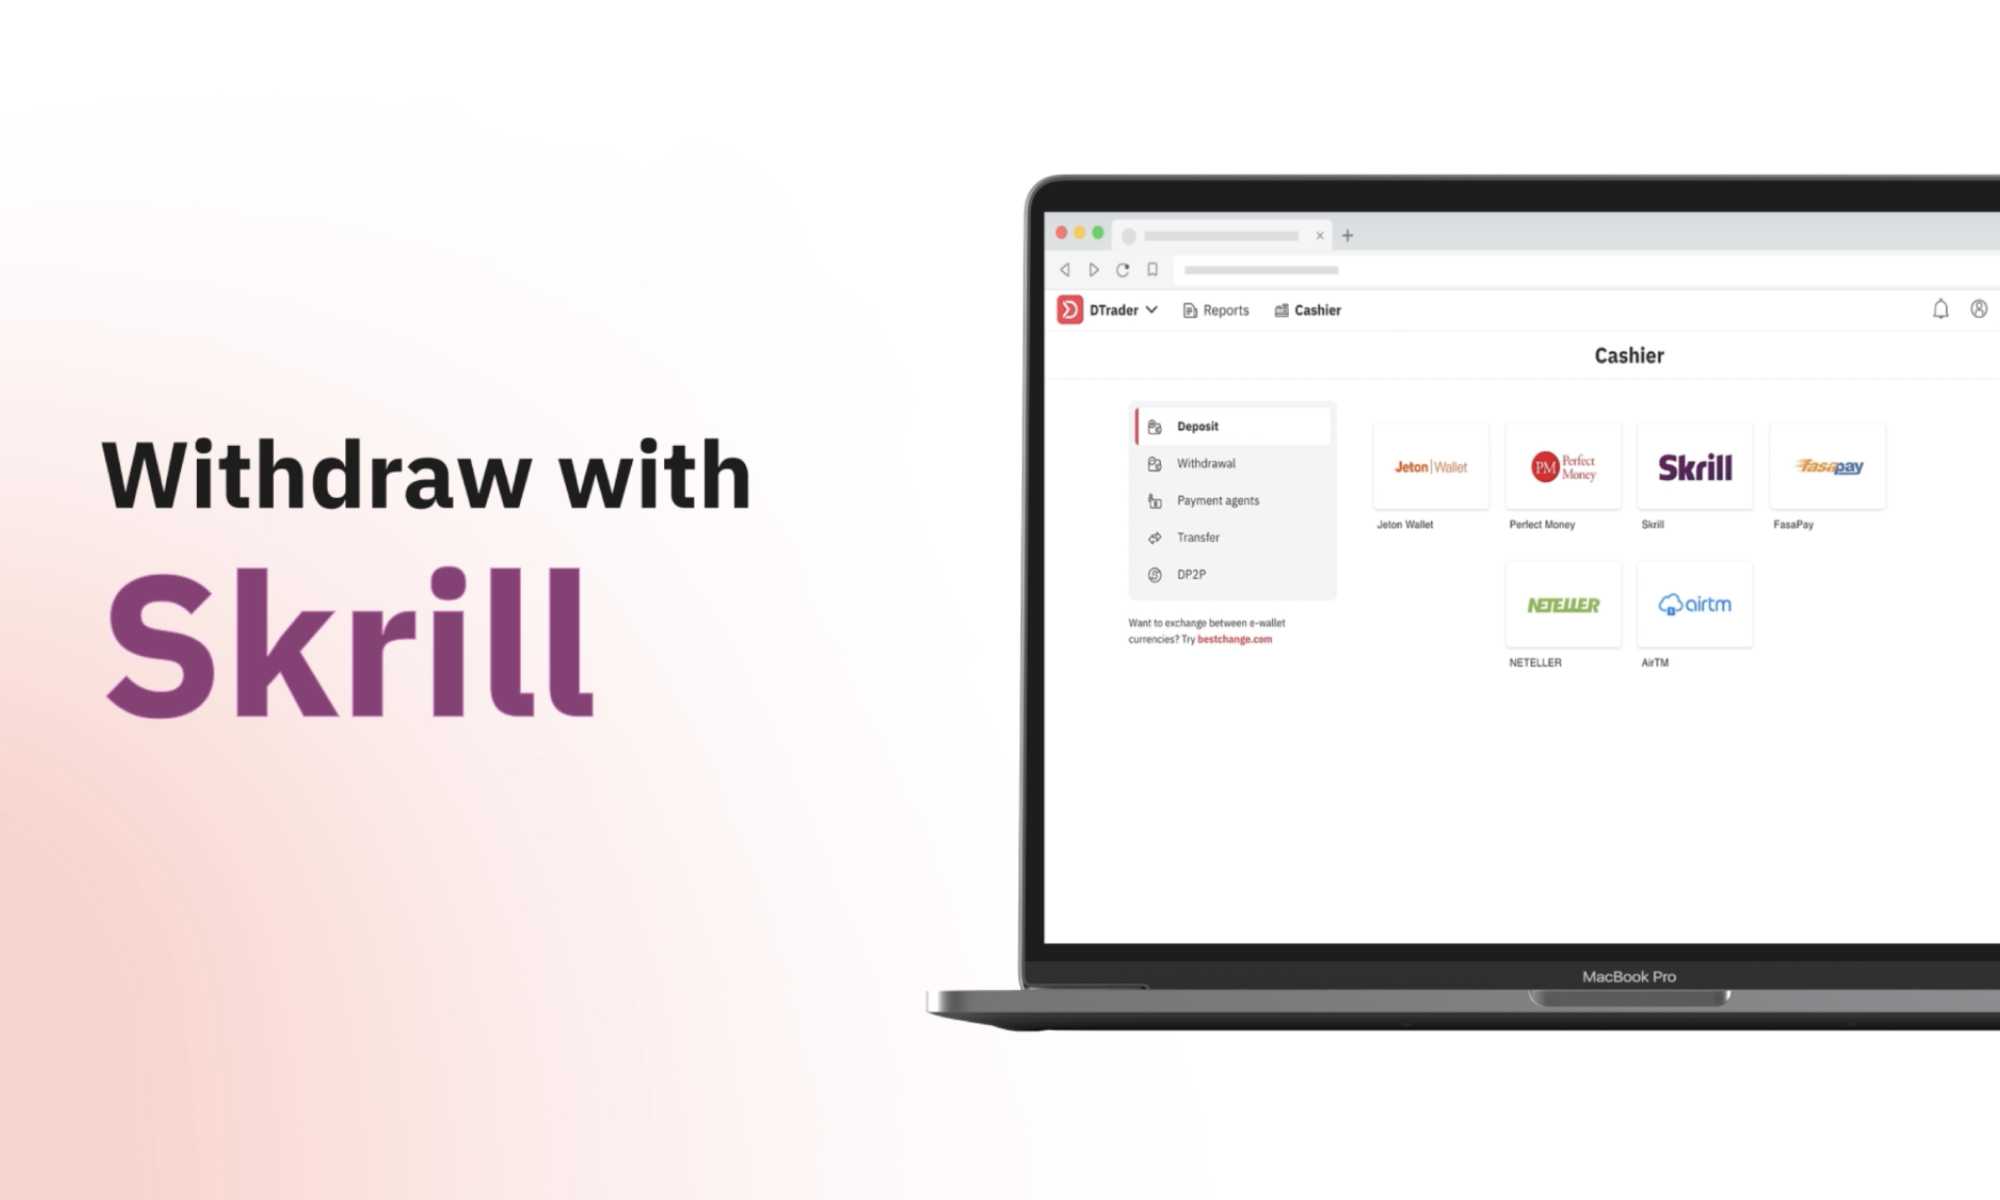 Find out how to withdraw funds from your Deriv account via Skrill.